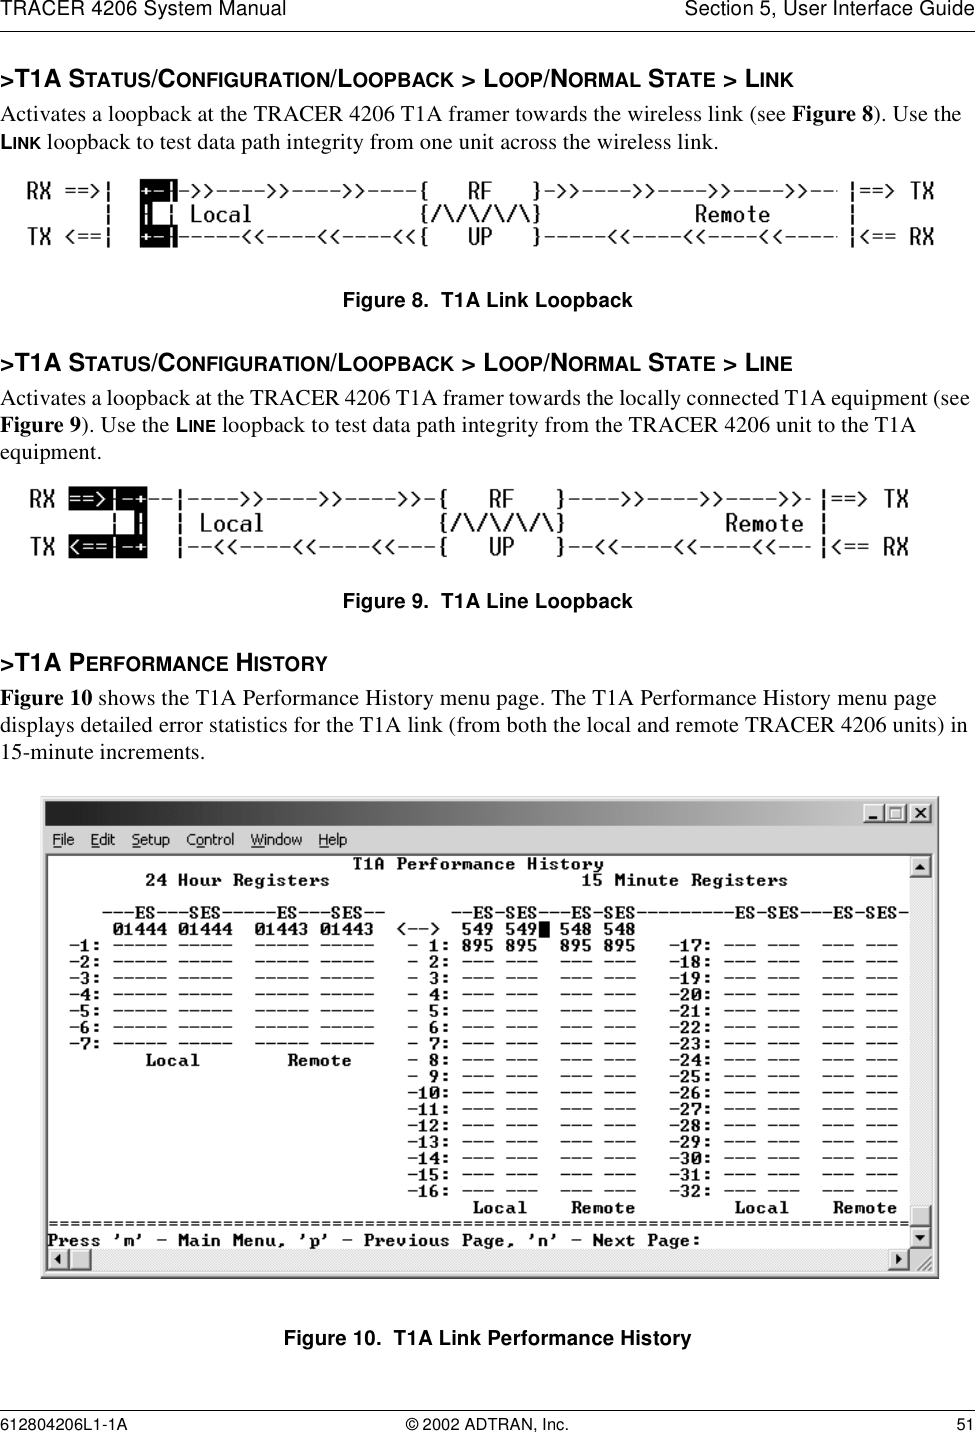 TRACER 4206 System Manual Section 5, User Interface Guide612804206L1-1A © 2002 ADTRAN, Inc. 51&gt;T1A STATUS/CONFIGURATION/LOOPBACK &gt; LOOP/NORMAL STATE &gt; LINKActivates a loopback at the TRACER 4206 T1A framer towards the wireless link (see Figure 8). Use the LINK loopback to test data path integrity from one unit across the wireless link.Figure 8.  T1A Link Loopback&gt;T1A STATUS/CONFIGURATION/LOOPBACK &gt; LOOP/NORMAL STATE &gt; LINEActivates a loopback at the TRACER 4206 T1A framer towards the locally connected T1A equipment (see Figure 9). Use the LINE loopback to test data path integrity from the TRACER 4206 unit to the T1A equipment.Figure 9.  T1A Line Loopback&gt;T1A PERFORMANCE HISTORYFigure 10 shows the T1A Performance History menu page. The T1A Performance History menu page displays detailed error statistics for the T1A link (from both the local and remote TRACER 4206 units) in 15-minute increments. Figure 10.  T1A Link Performance History